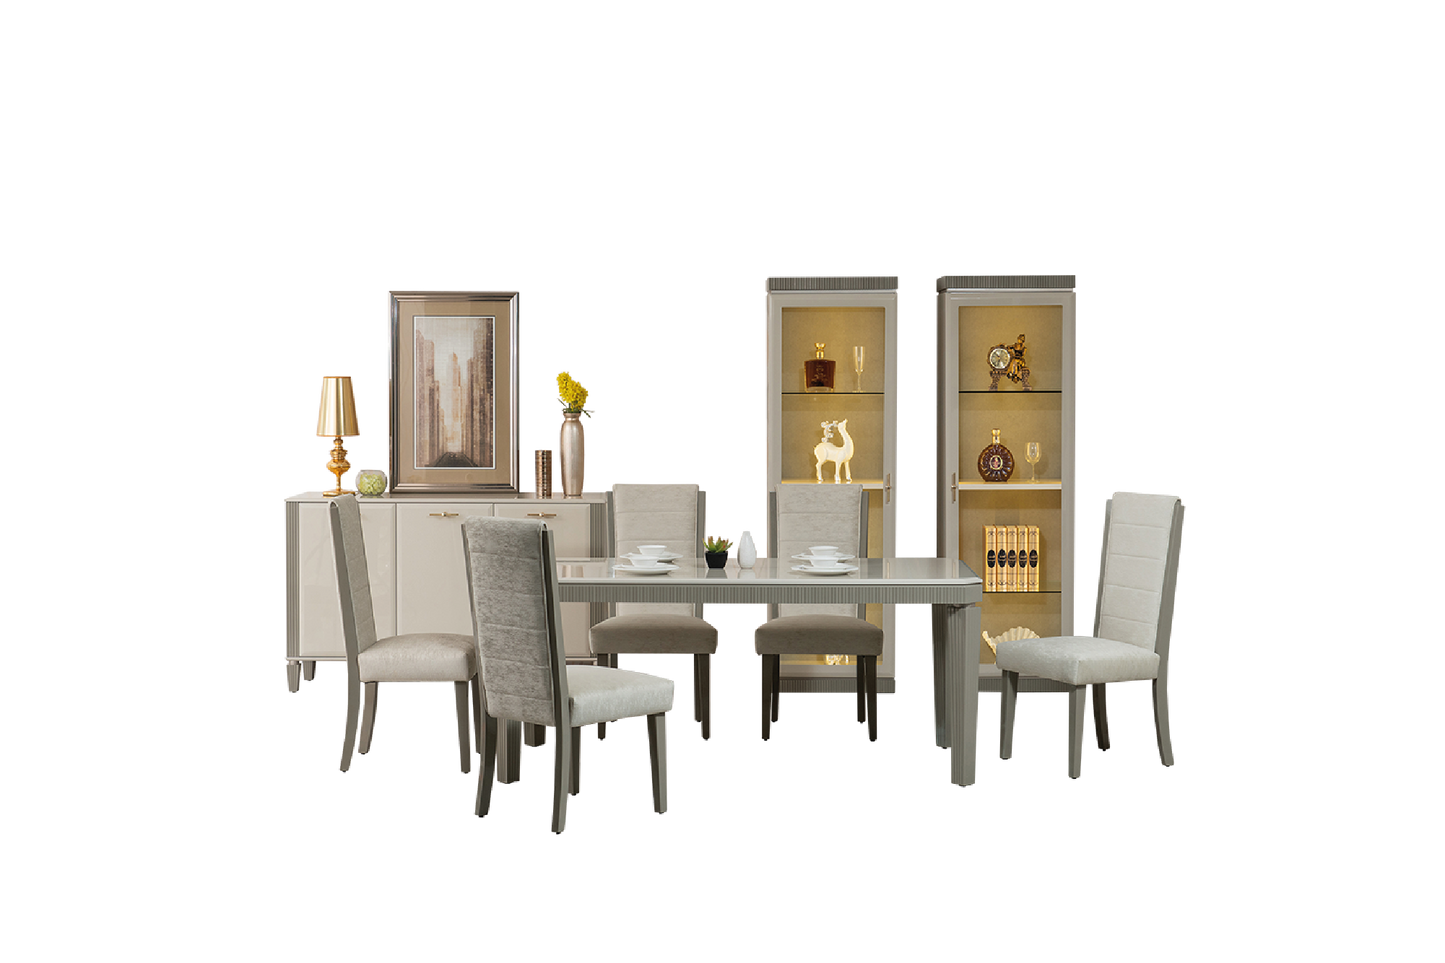 Imperial Dining Table